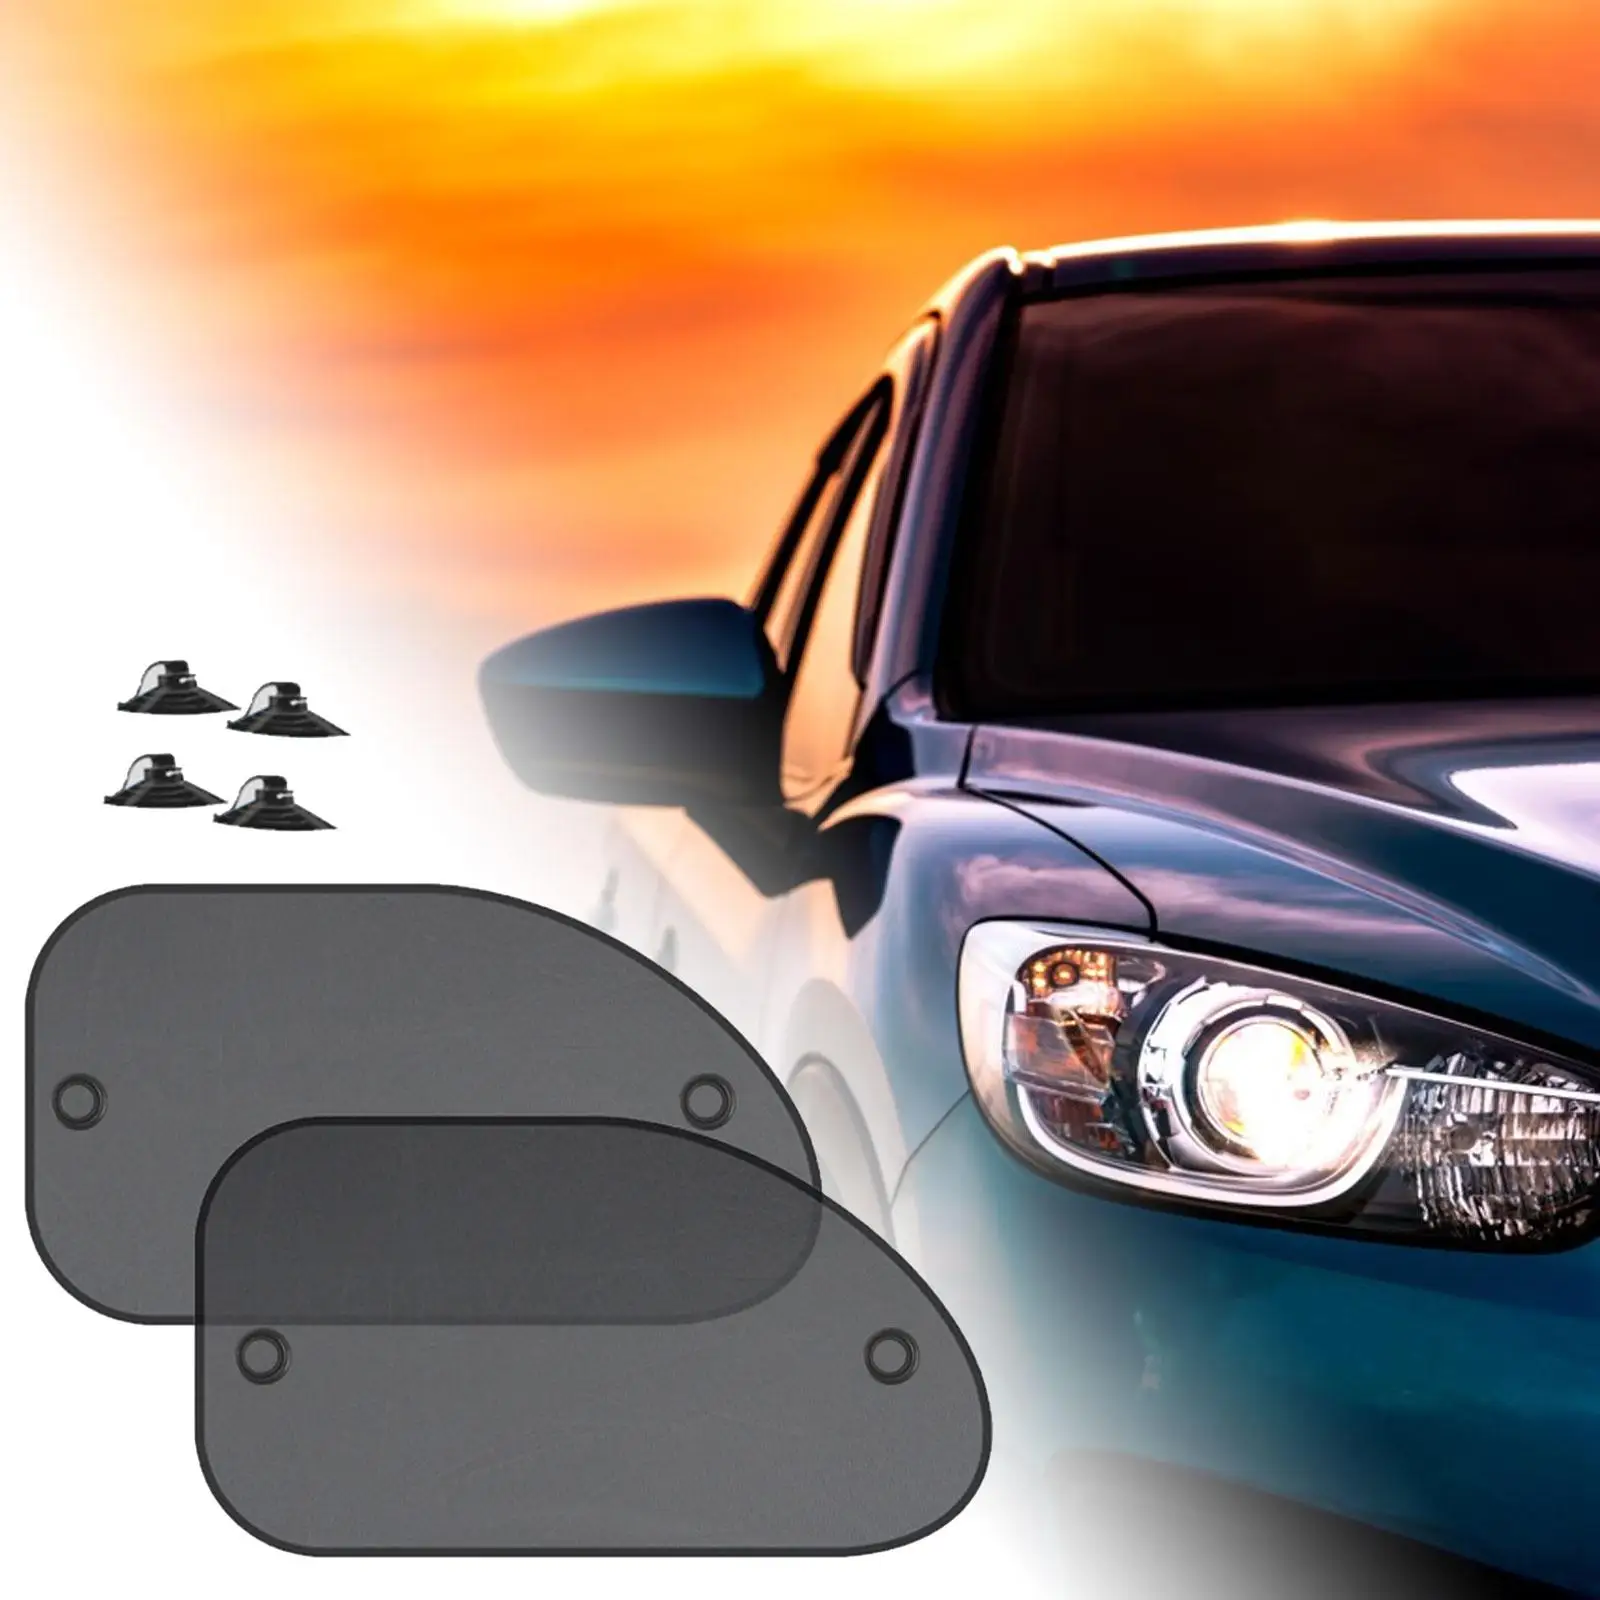 2Pcs Car Window Shades UV Protection Car Sun Shade for Most Vehicles Keep Passengers and Car Interior Cool Changing Clothes